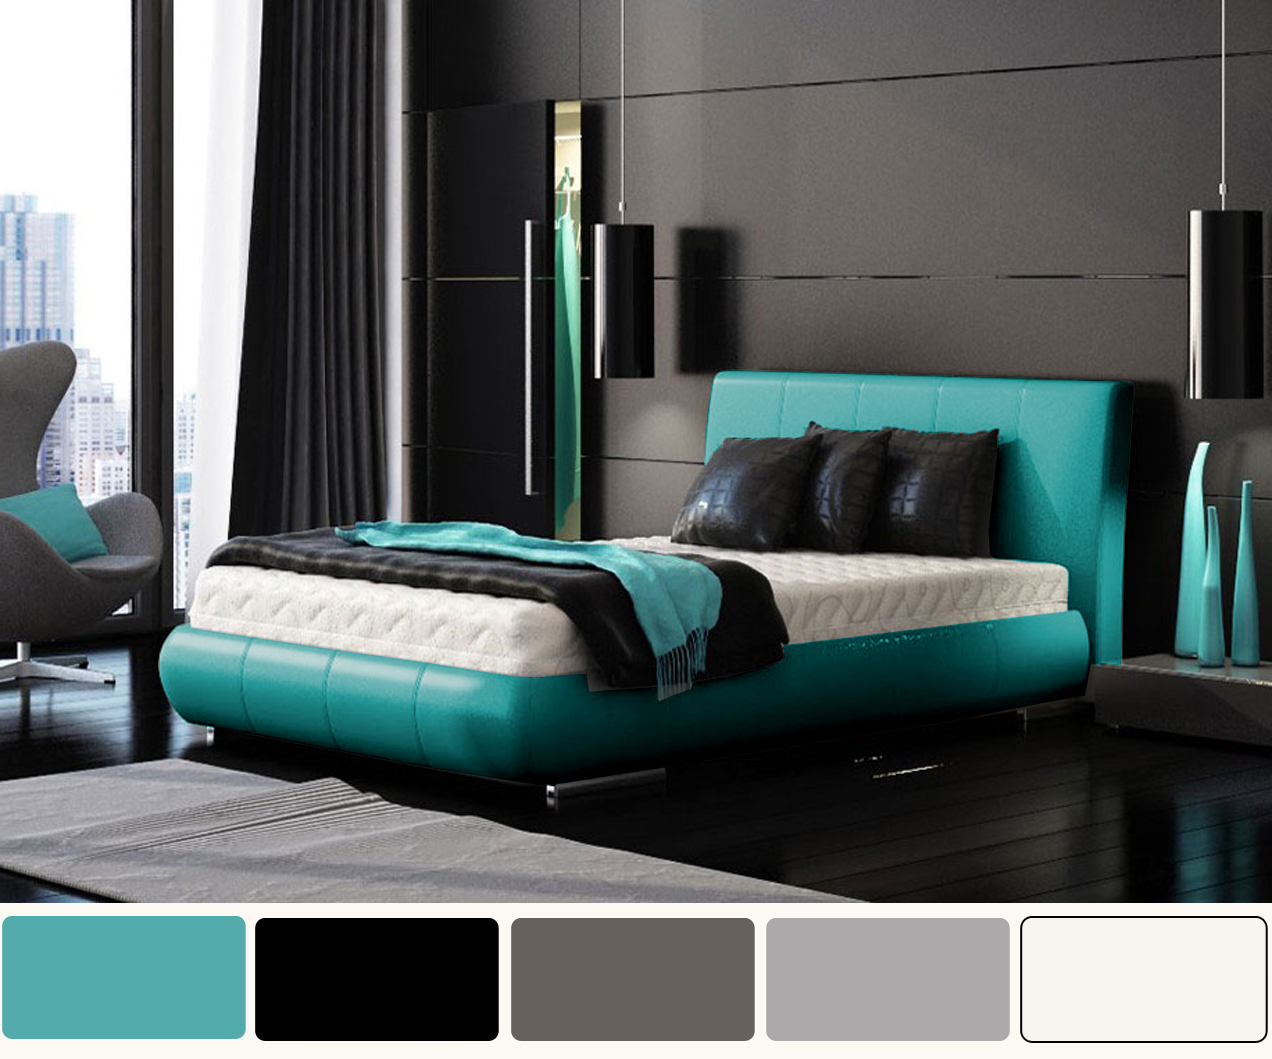 Black White and Turquoise Bedroom Idea